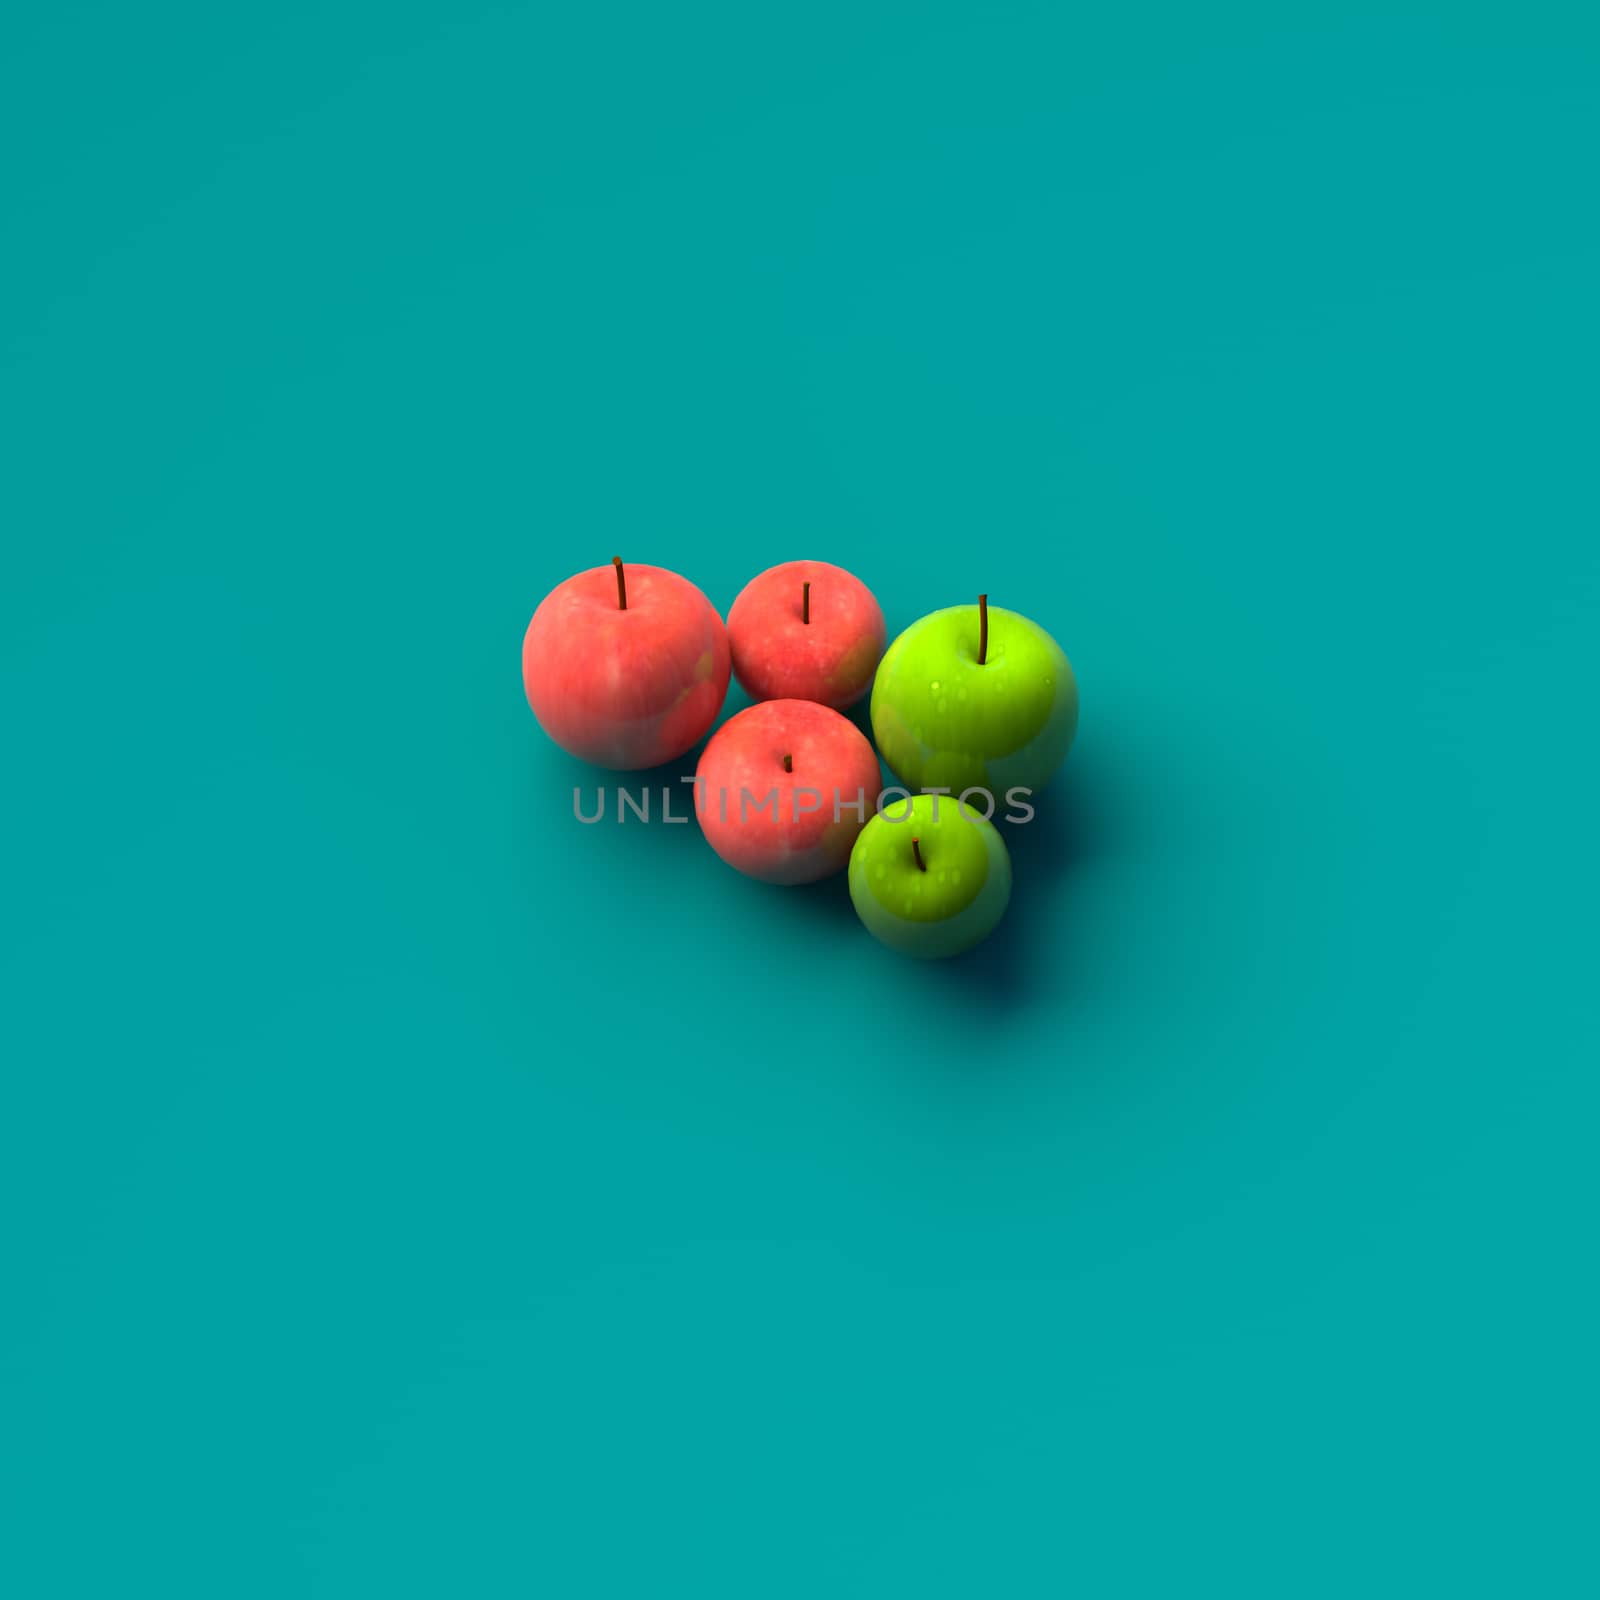 COLOR PHOTO OF 3D RENDERING OF RED APPLES AND GREEN PEARS IN BASKET ON PLAIN BACKGROUND